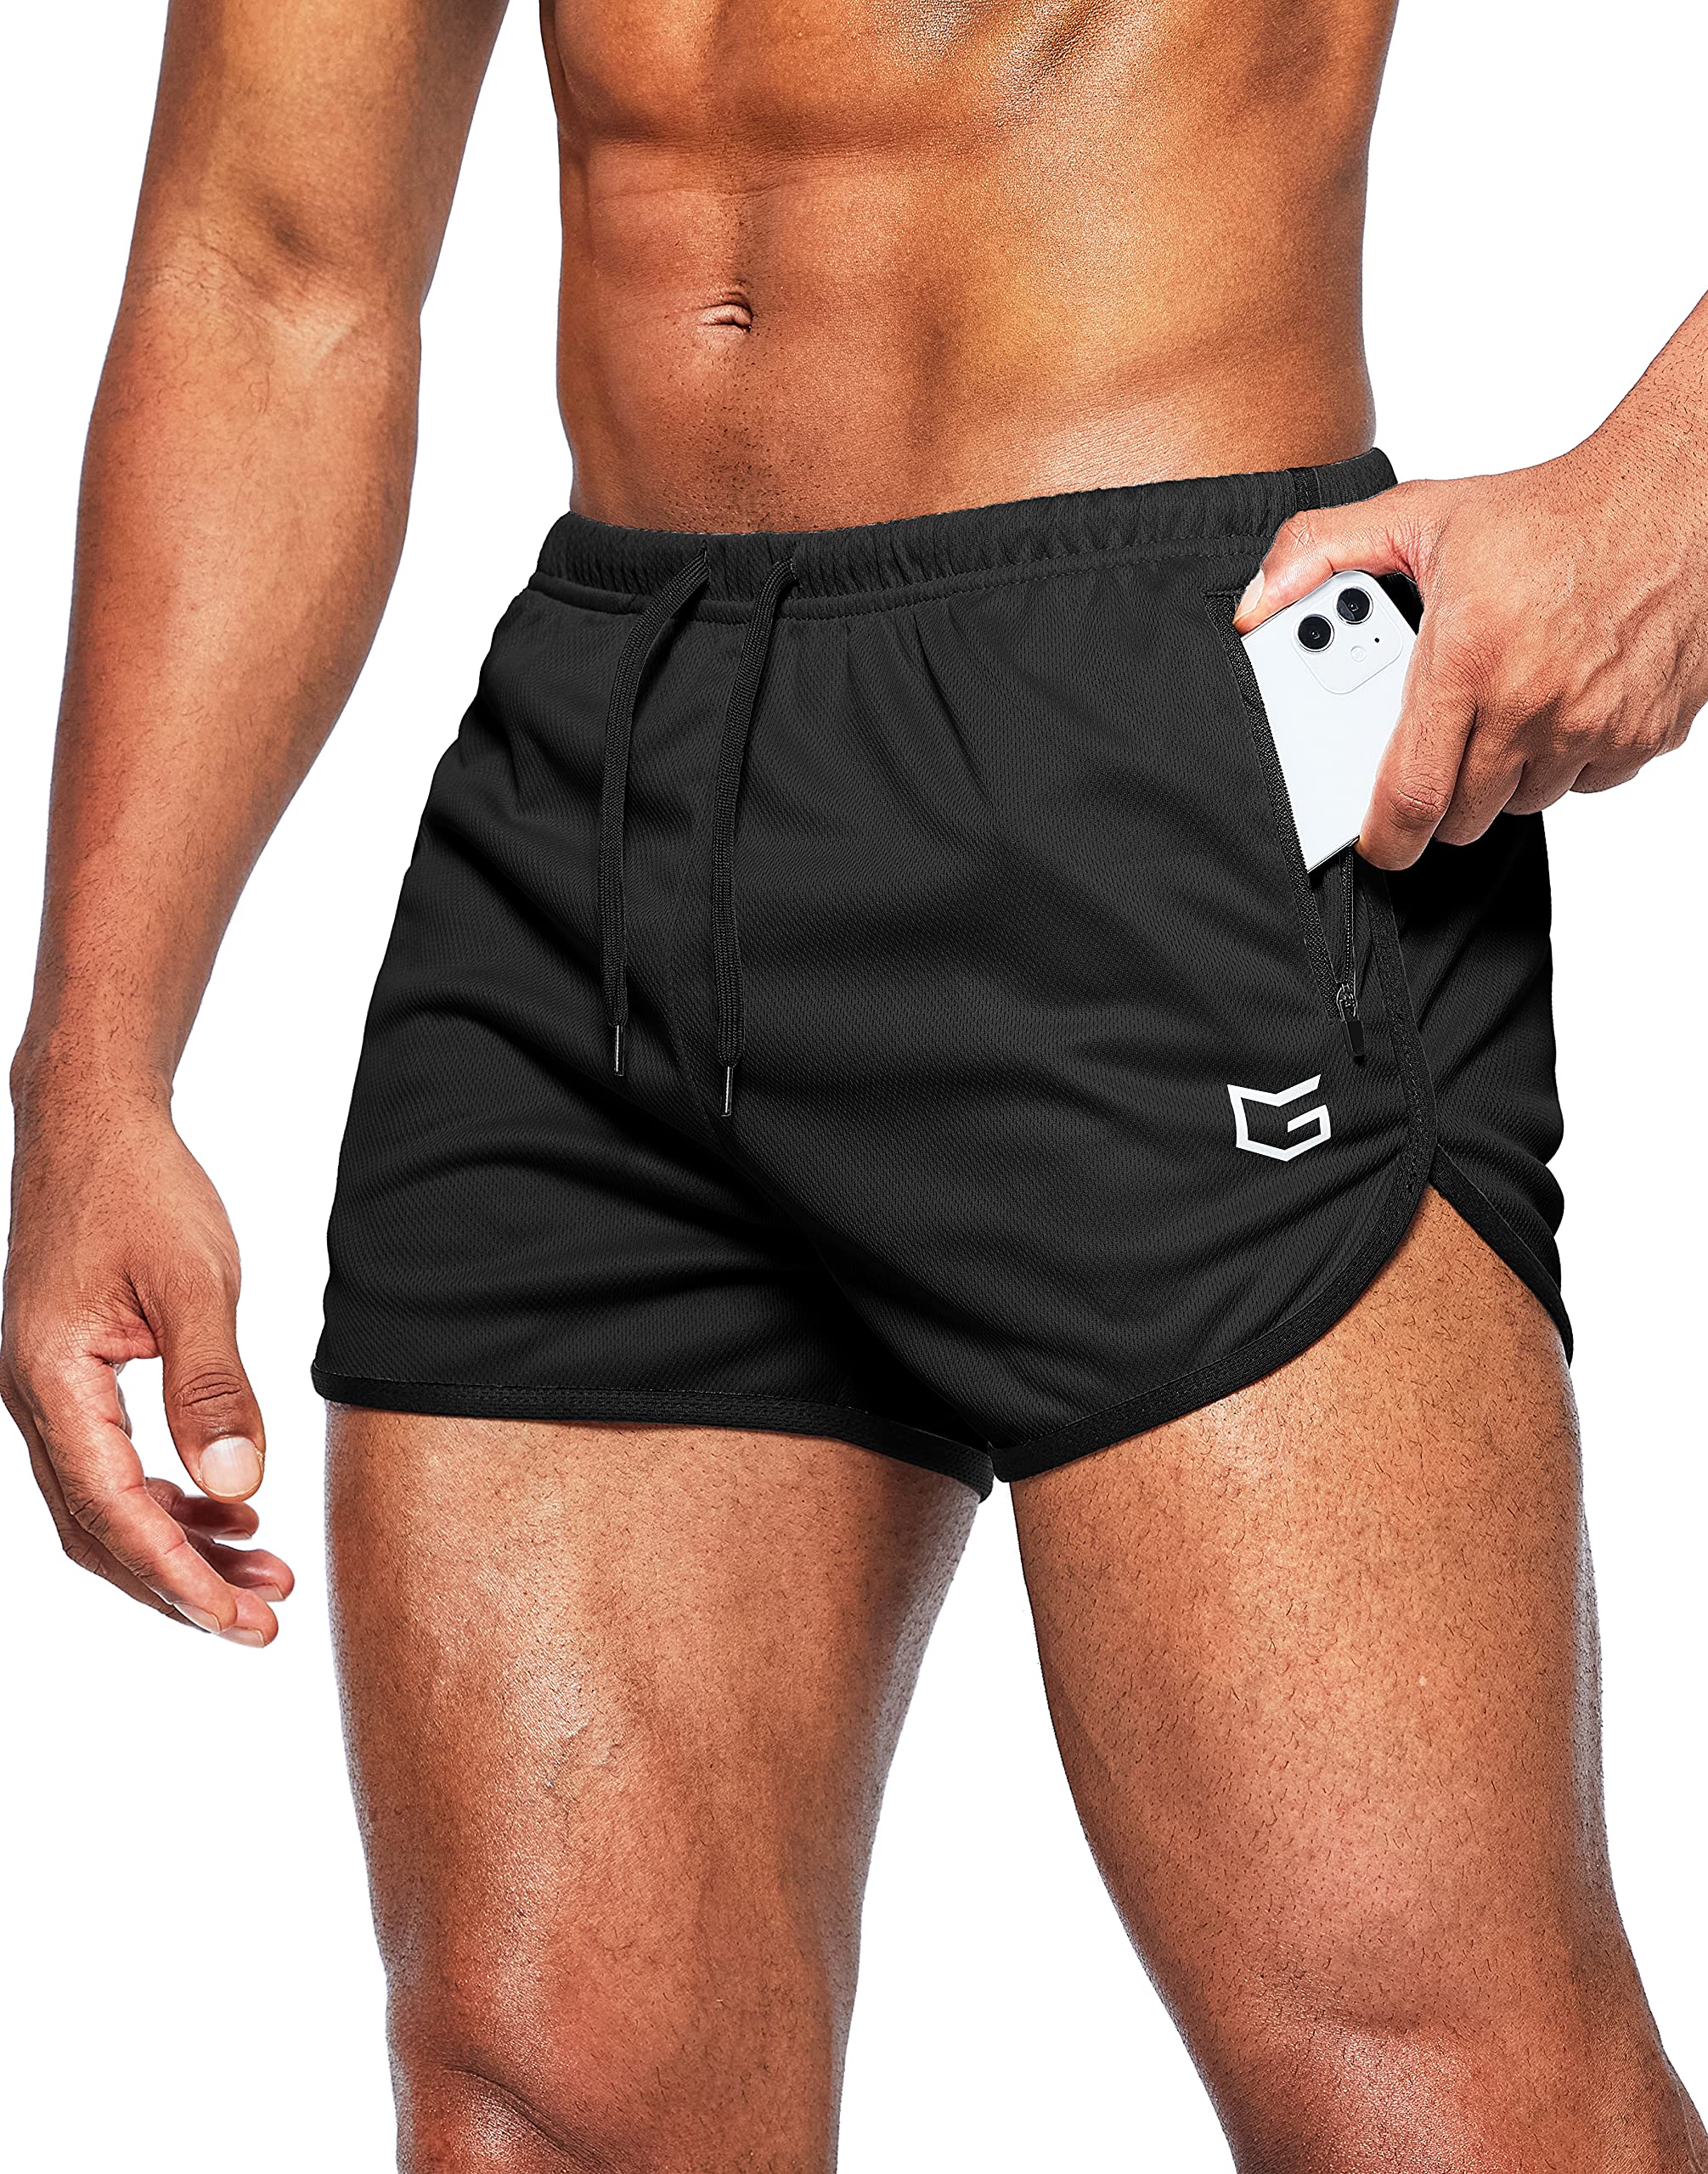 Mens Athletic Shorts, Gym Workout Shorts for Men Quick Dry Yoga Training  Running Shorts with Pockets, Black, 2XL